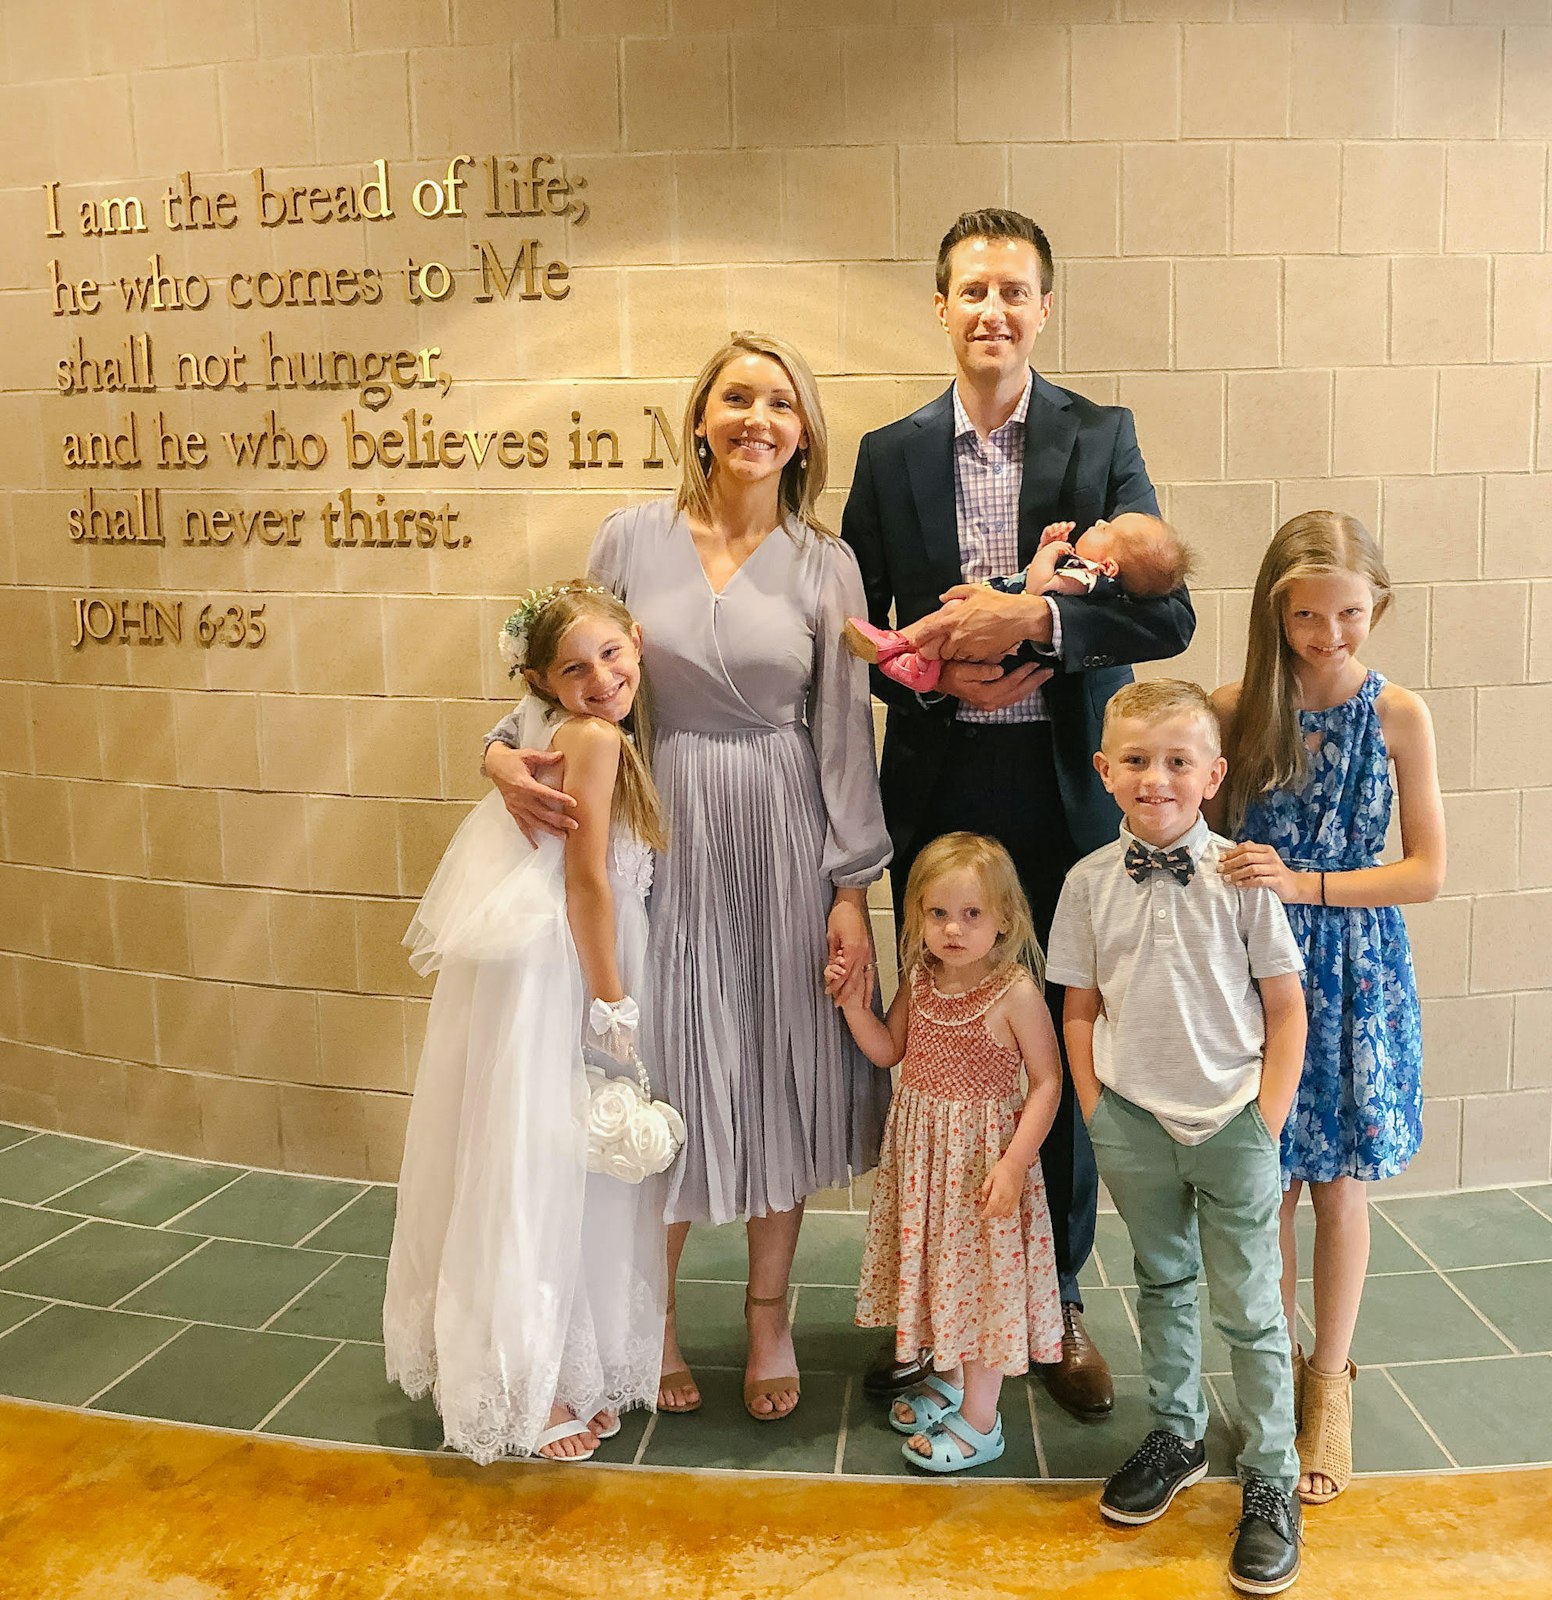 The Kidman family is pictured at Our Lady of Good Counsel Parish in Plymouth during daughter Audrey's first Communion celebration.